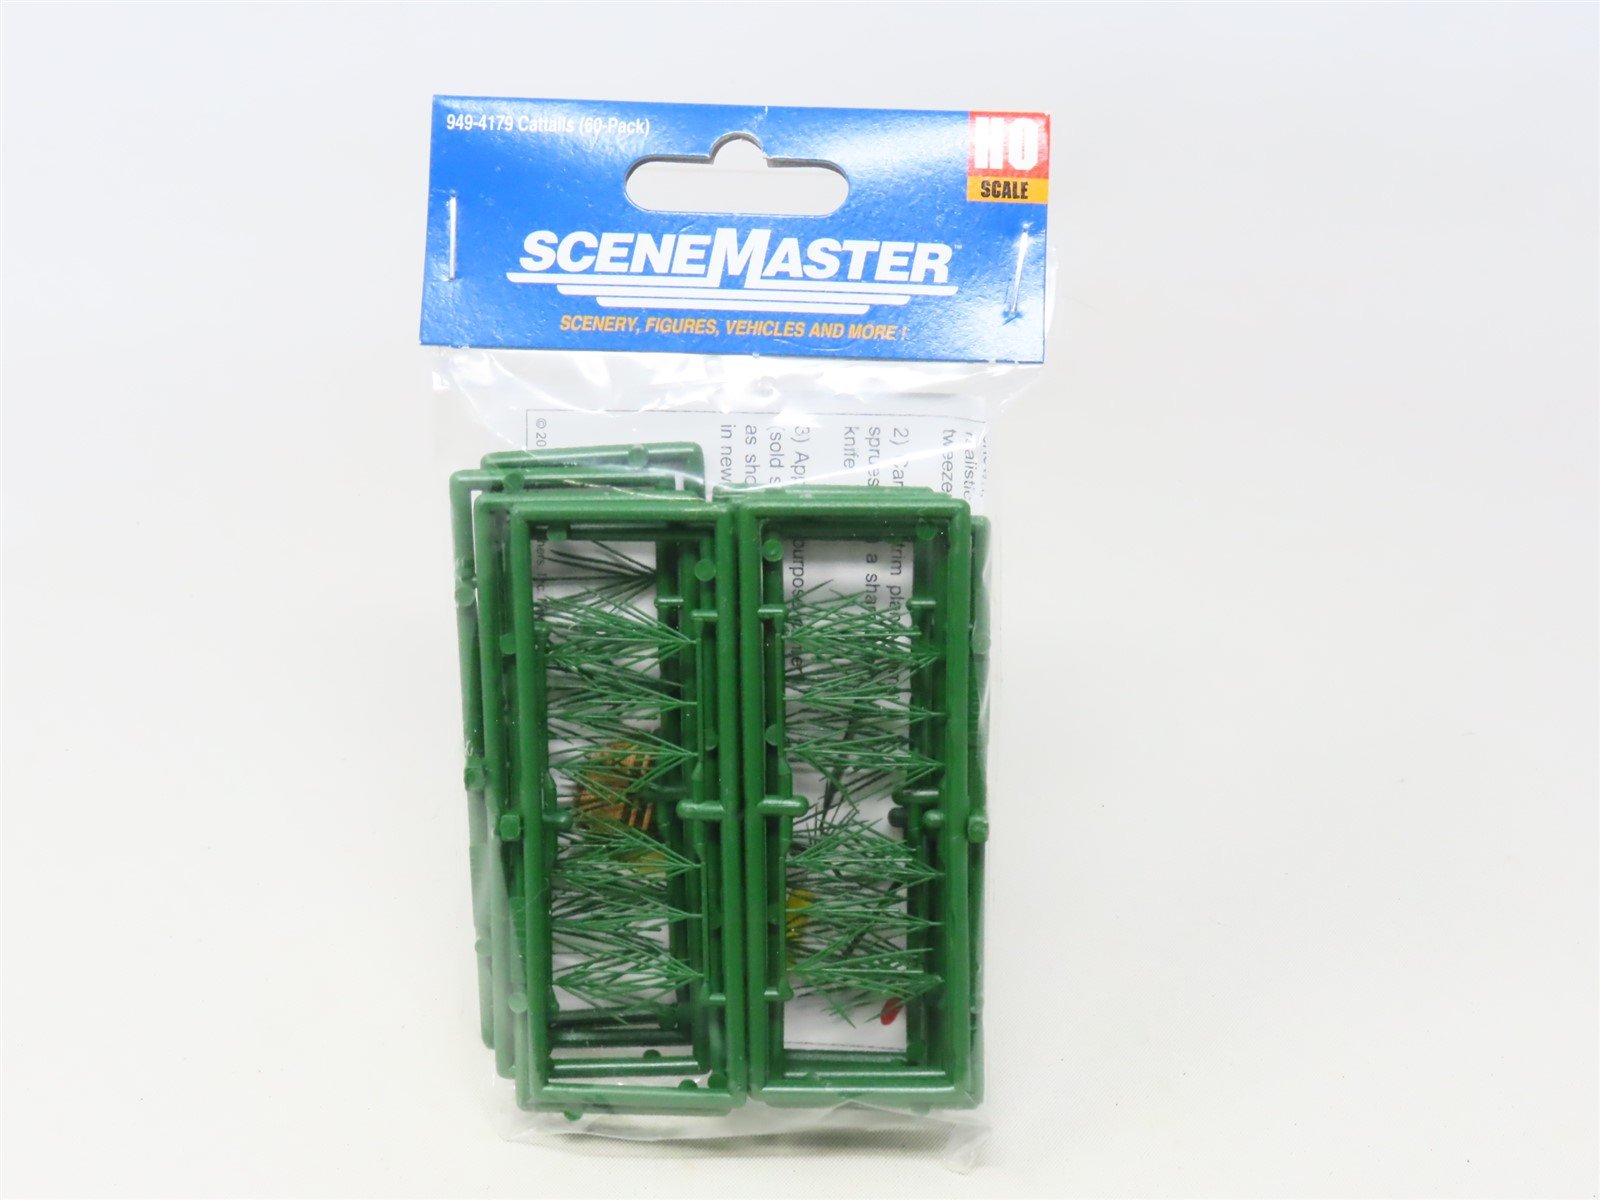 HO 1/87 Scale Walthers SceneMaster Kit #949-4179 Cattails 60-Pack